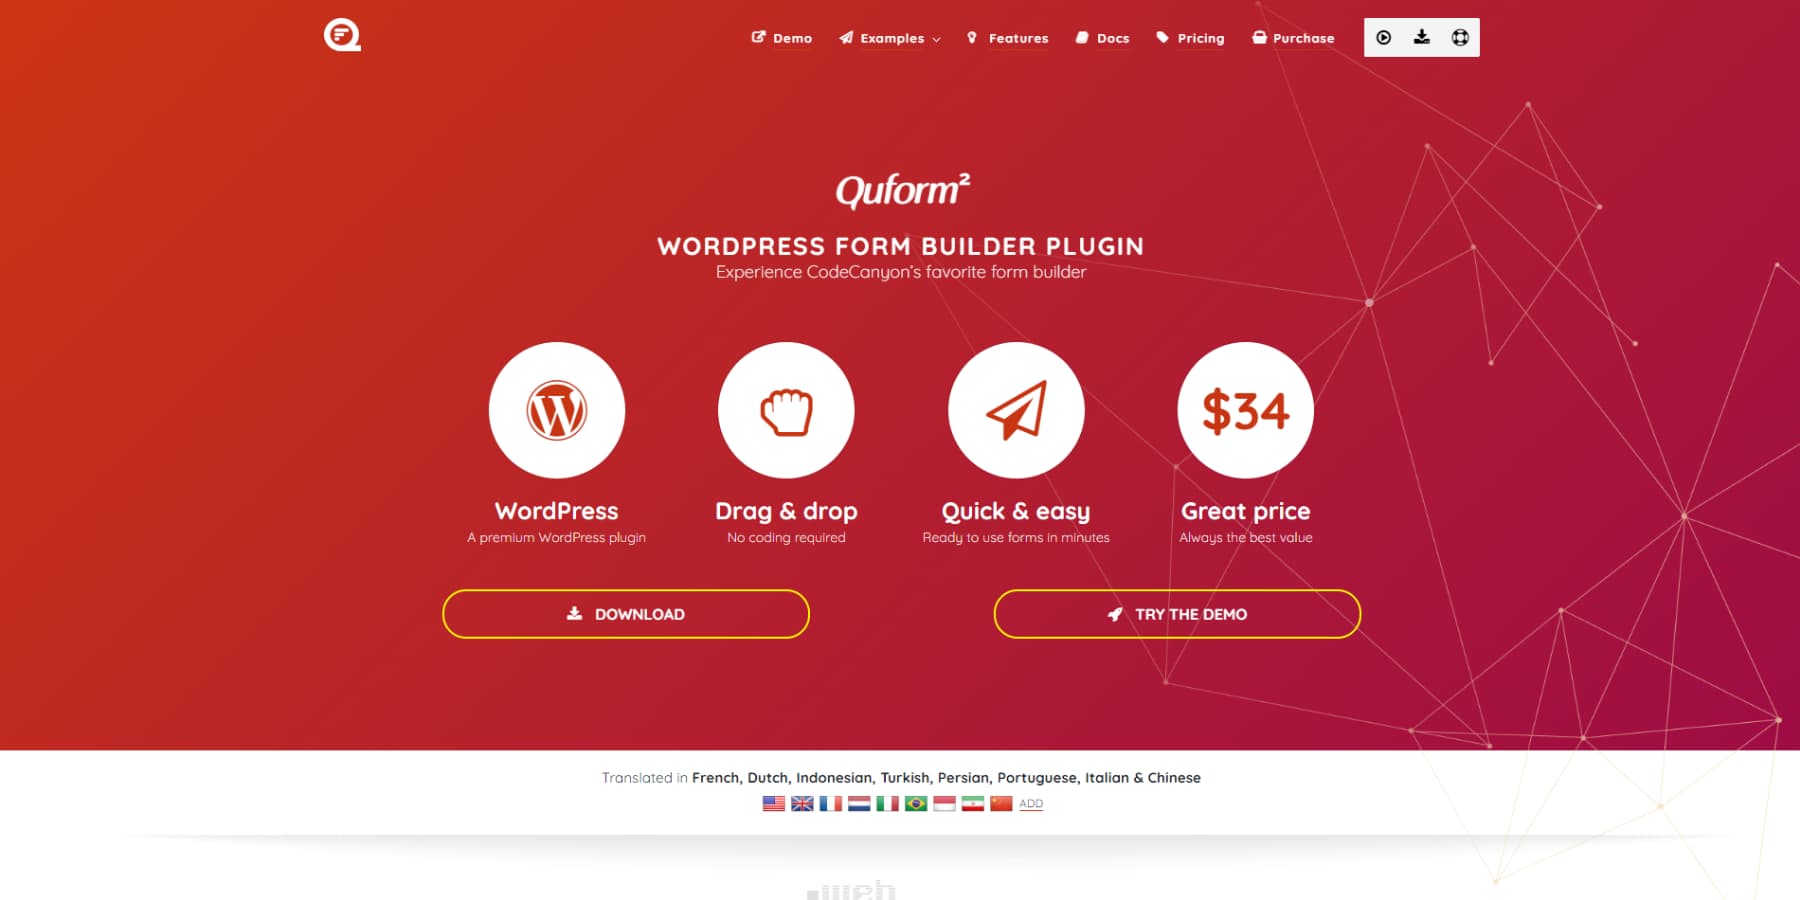 A screenshot of Quform's home page